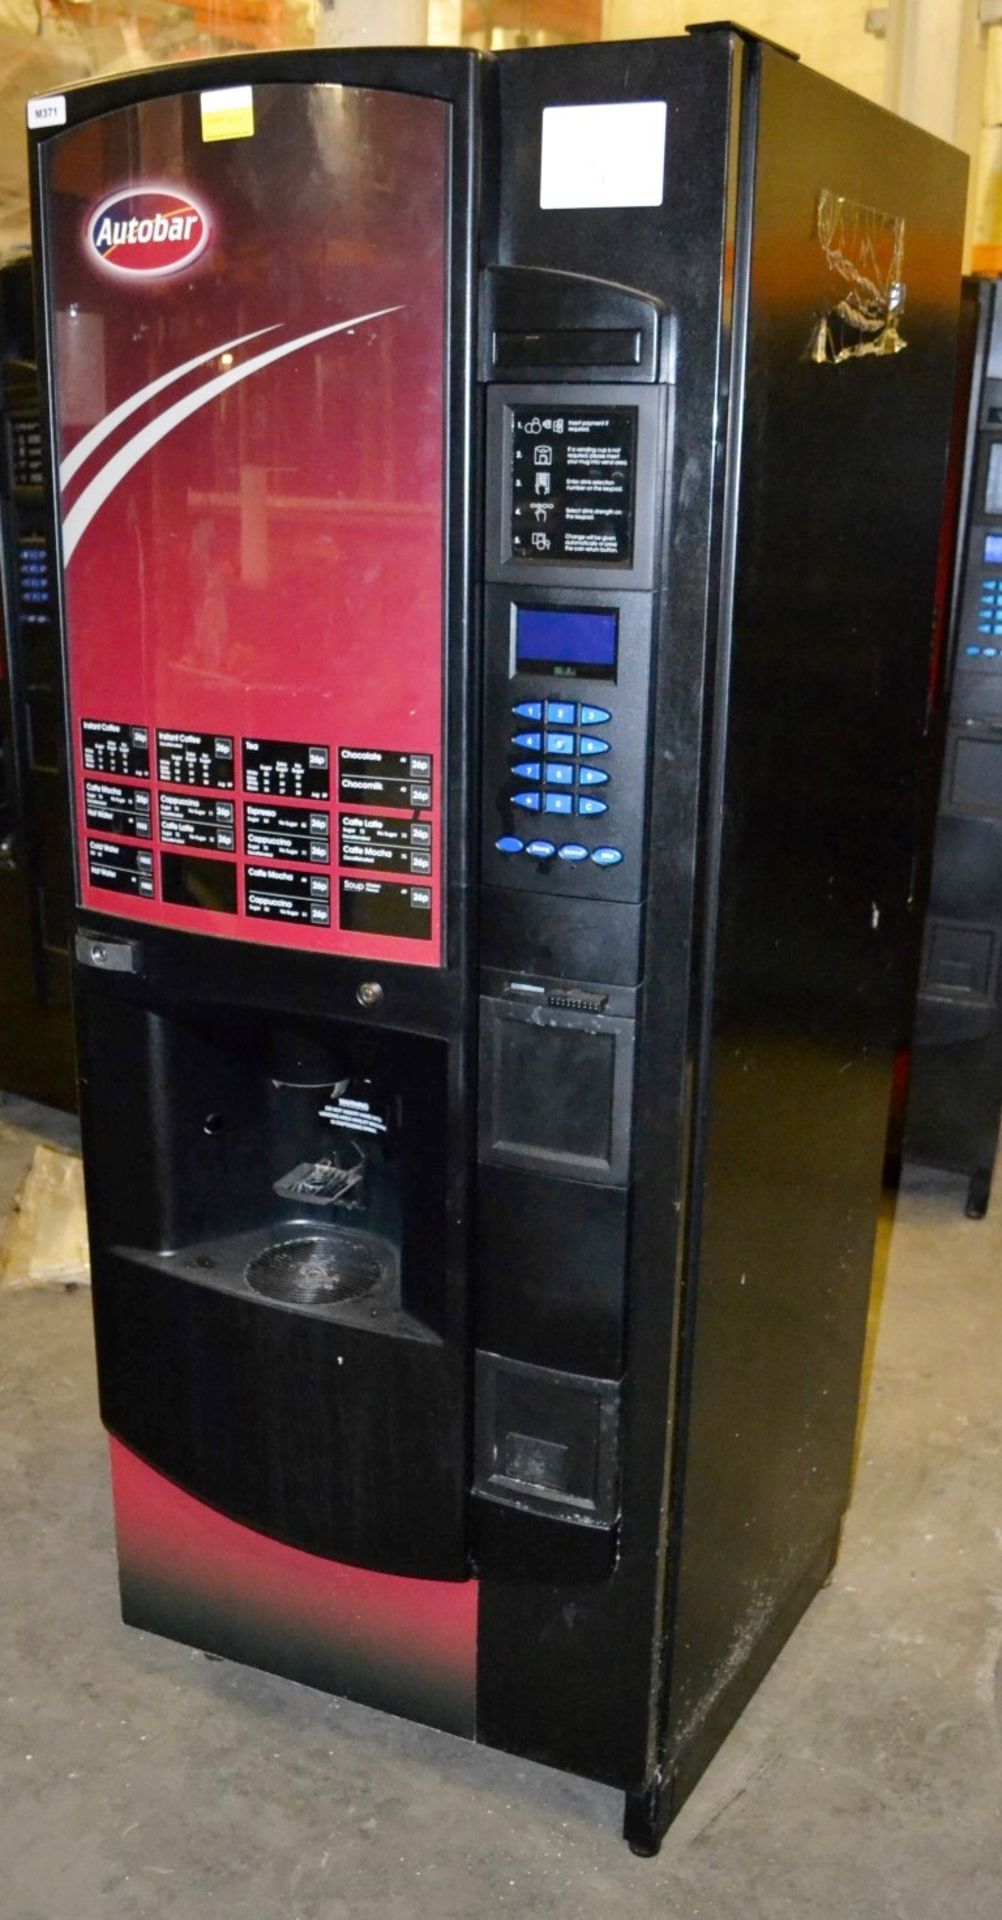 1 x Crane "Evolution" Hot Beverage Drinks Vending Machine - Year: 2009 - Recently Taken From A - Image 2 of 10